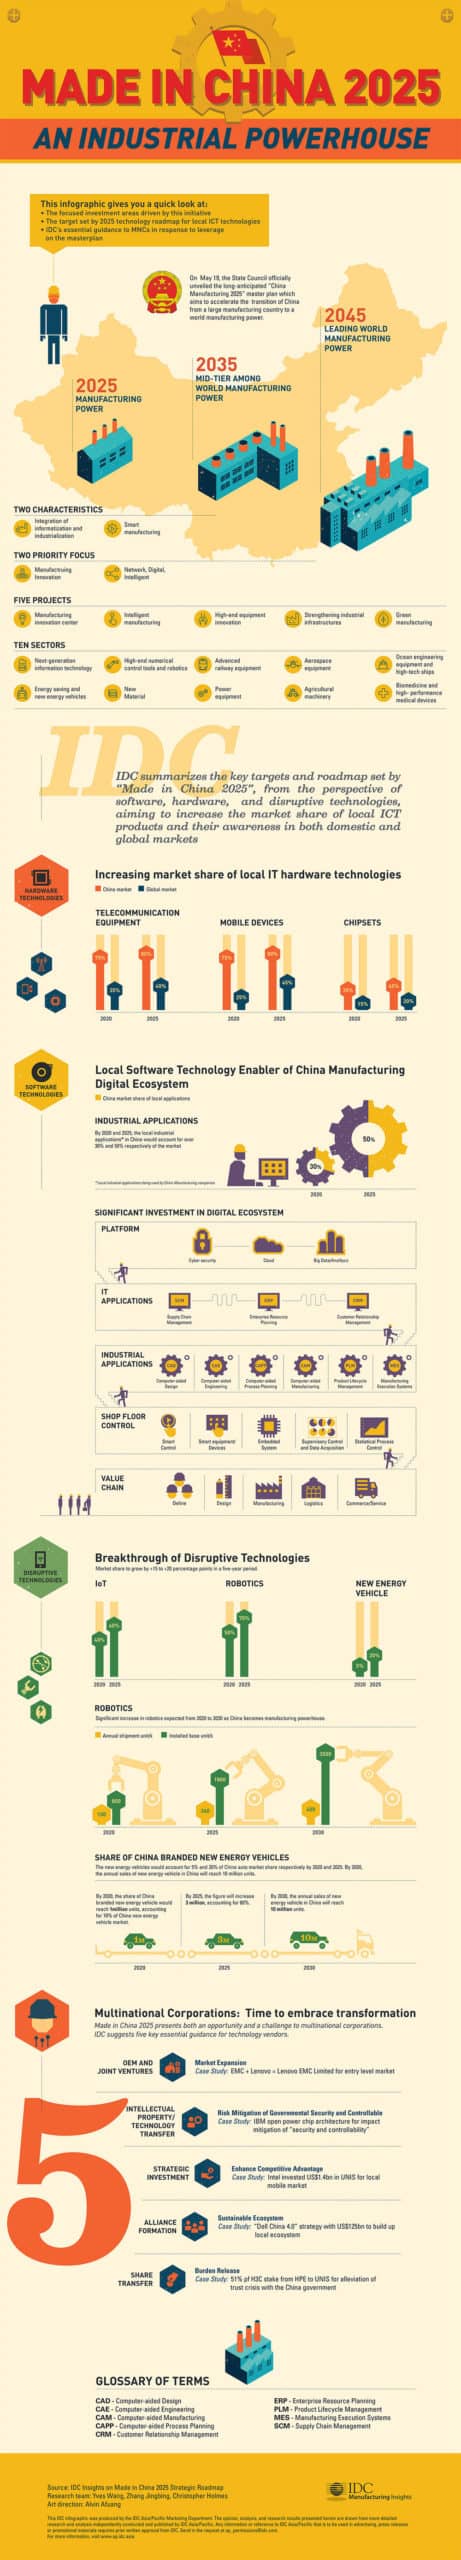 Made in China 2025 Infographic